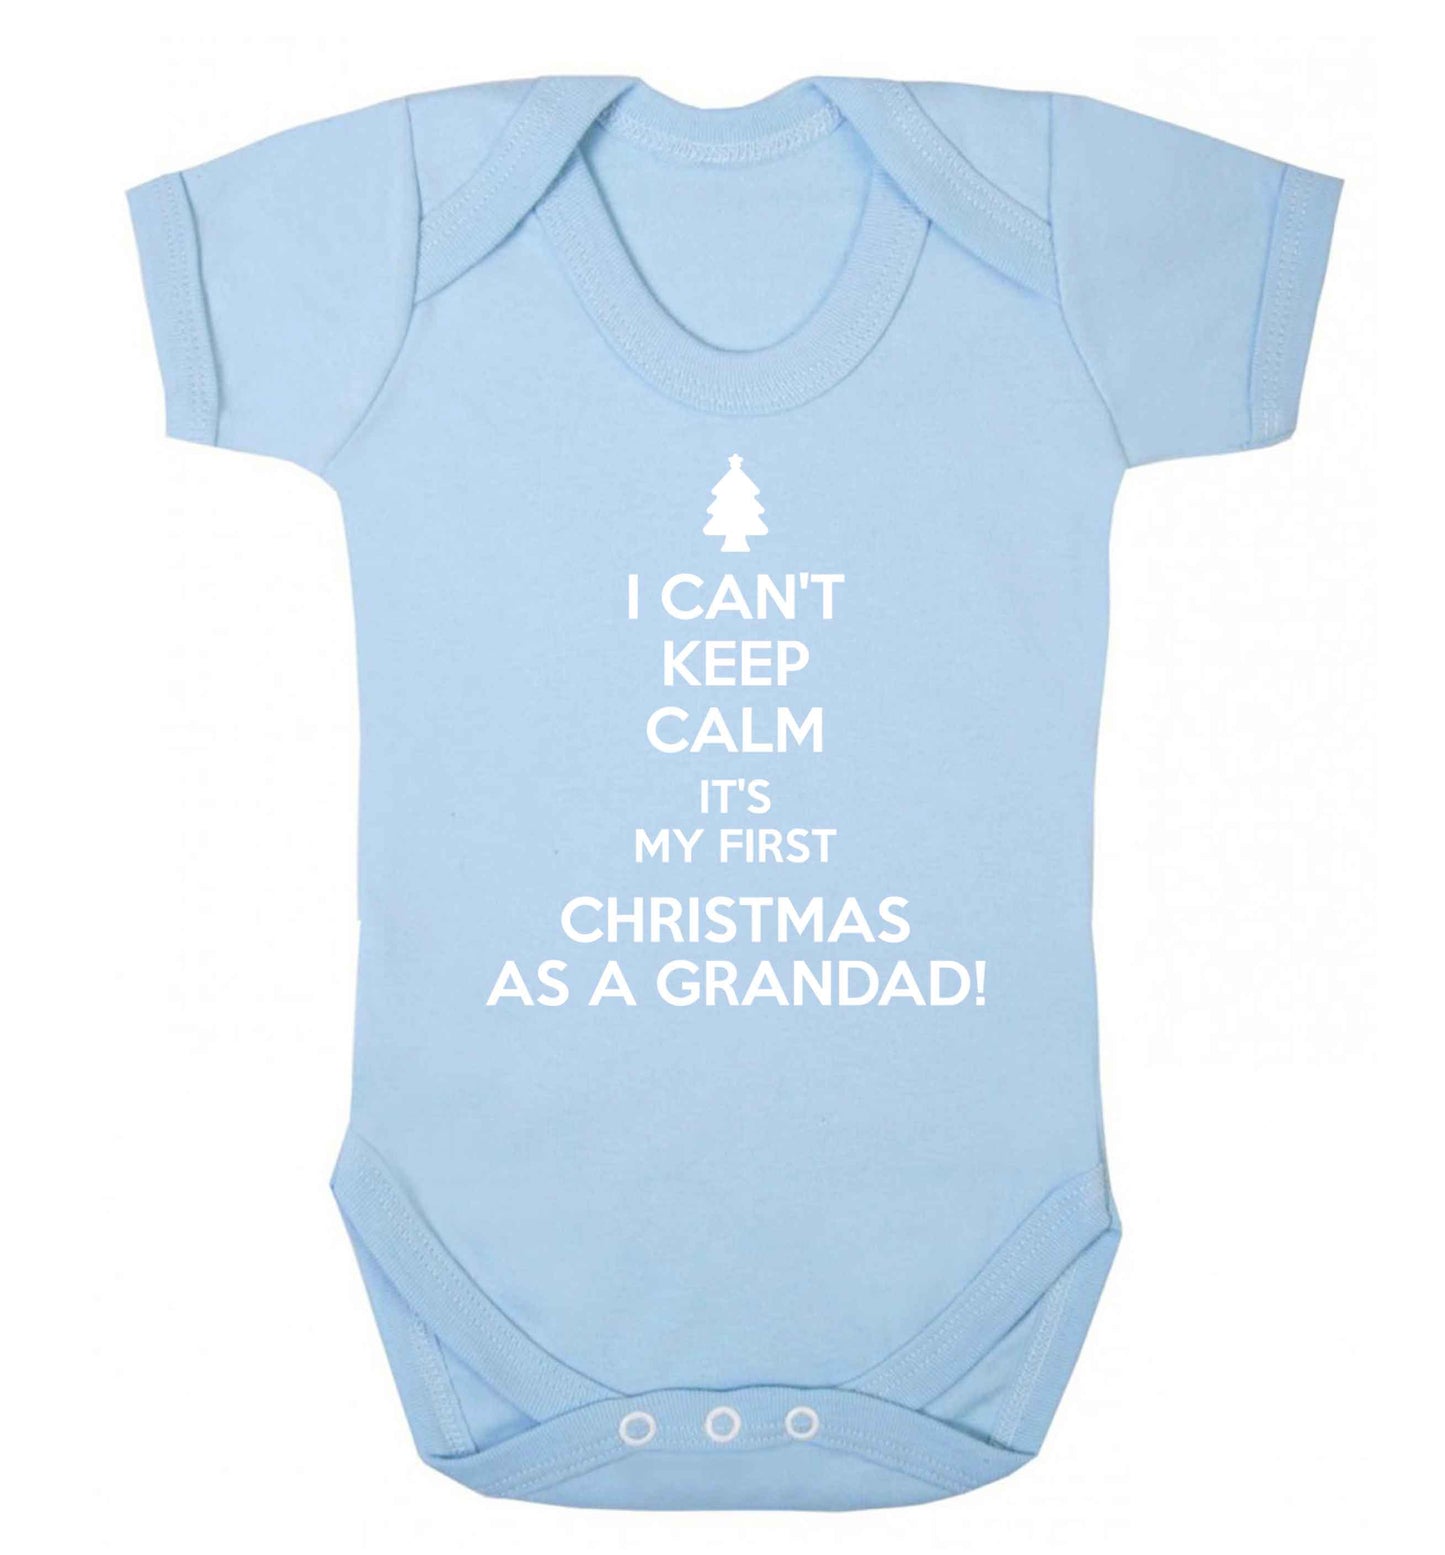 I can't keep calm it's my first Christmas as a grandad! Baby Vest pale blue 18-24 months